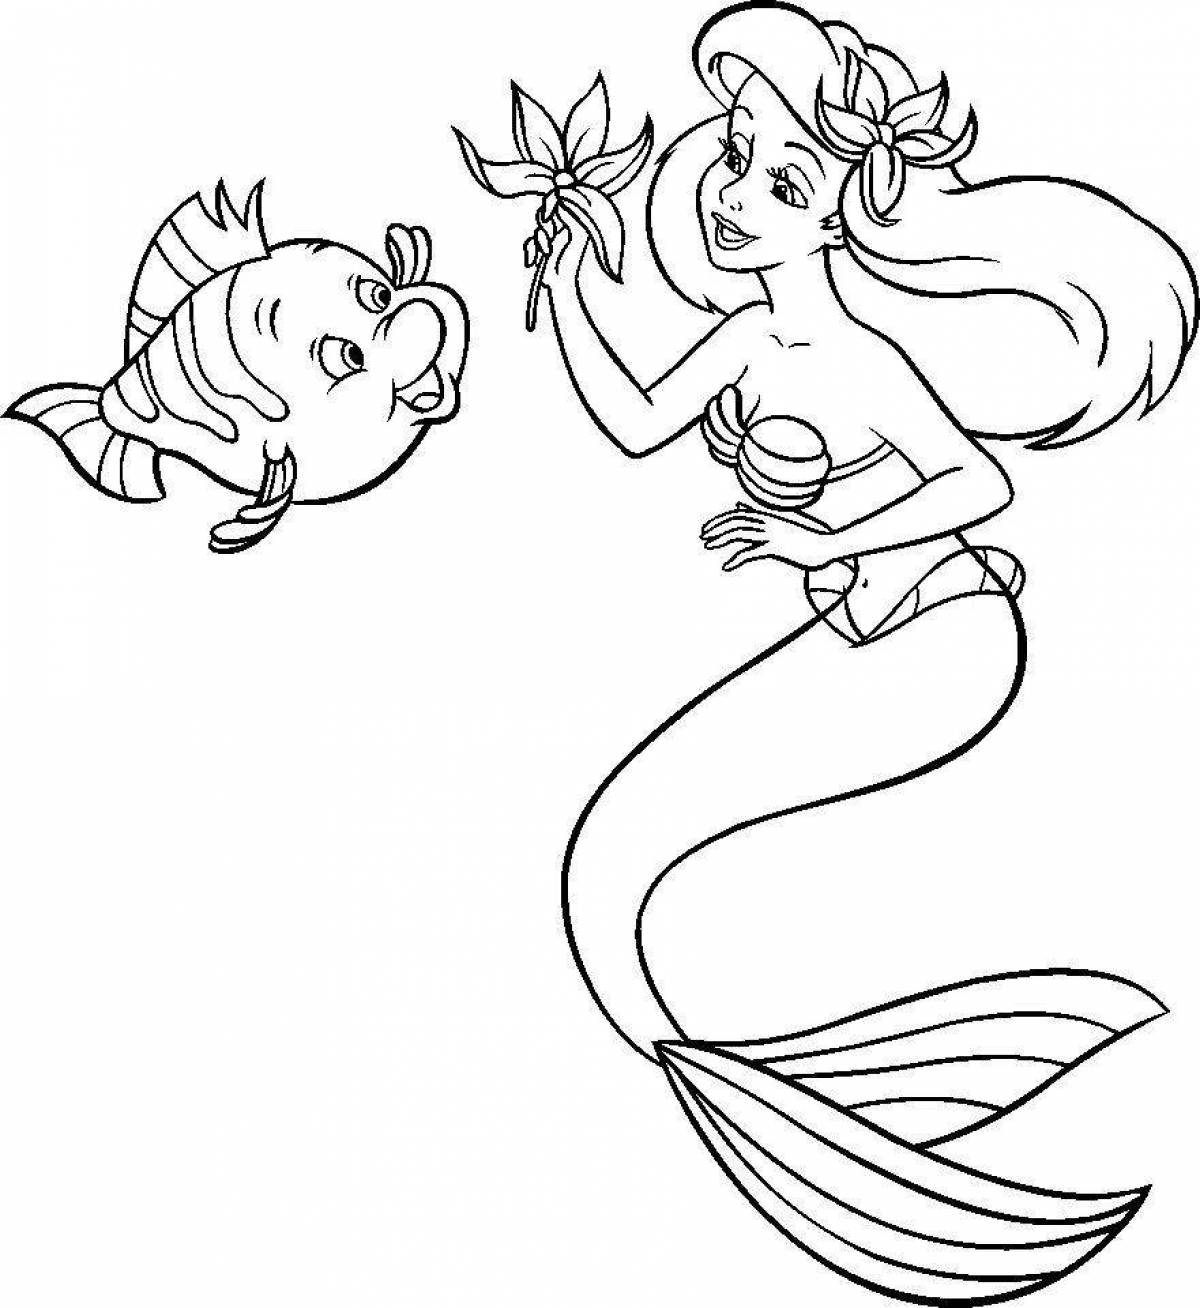 Dazzling little mermaid coloring book for girls